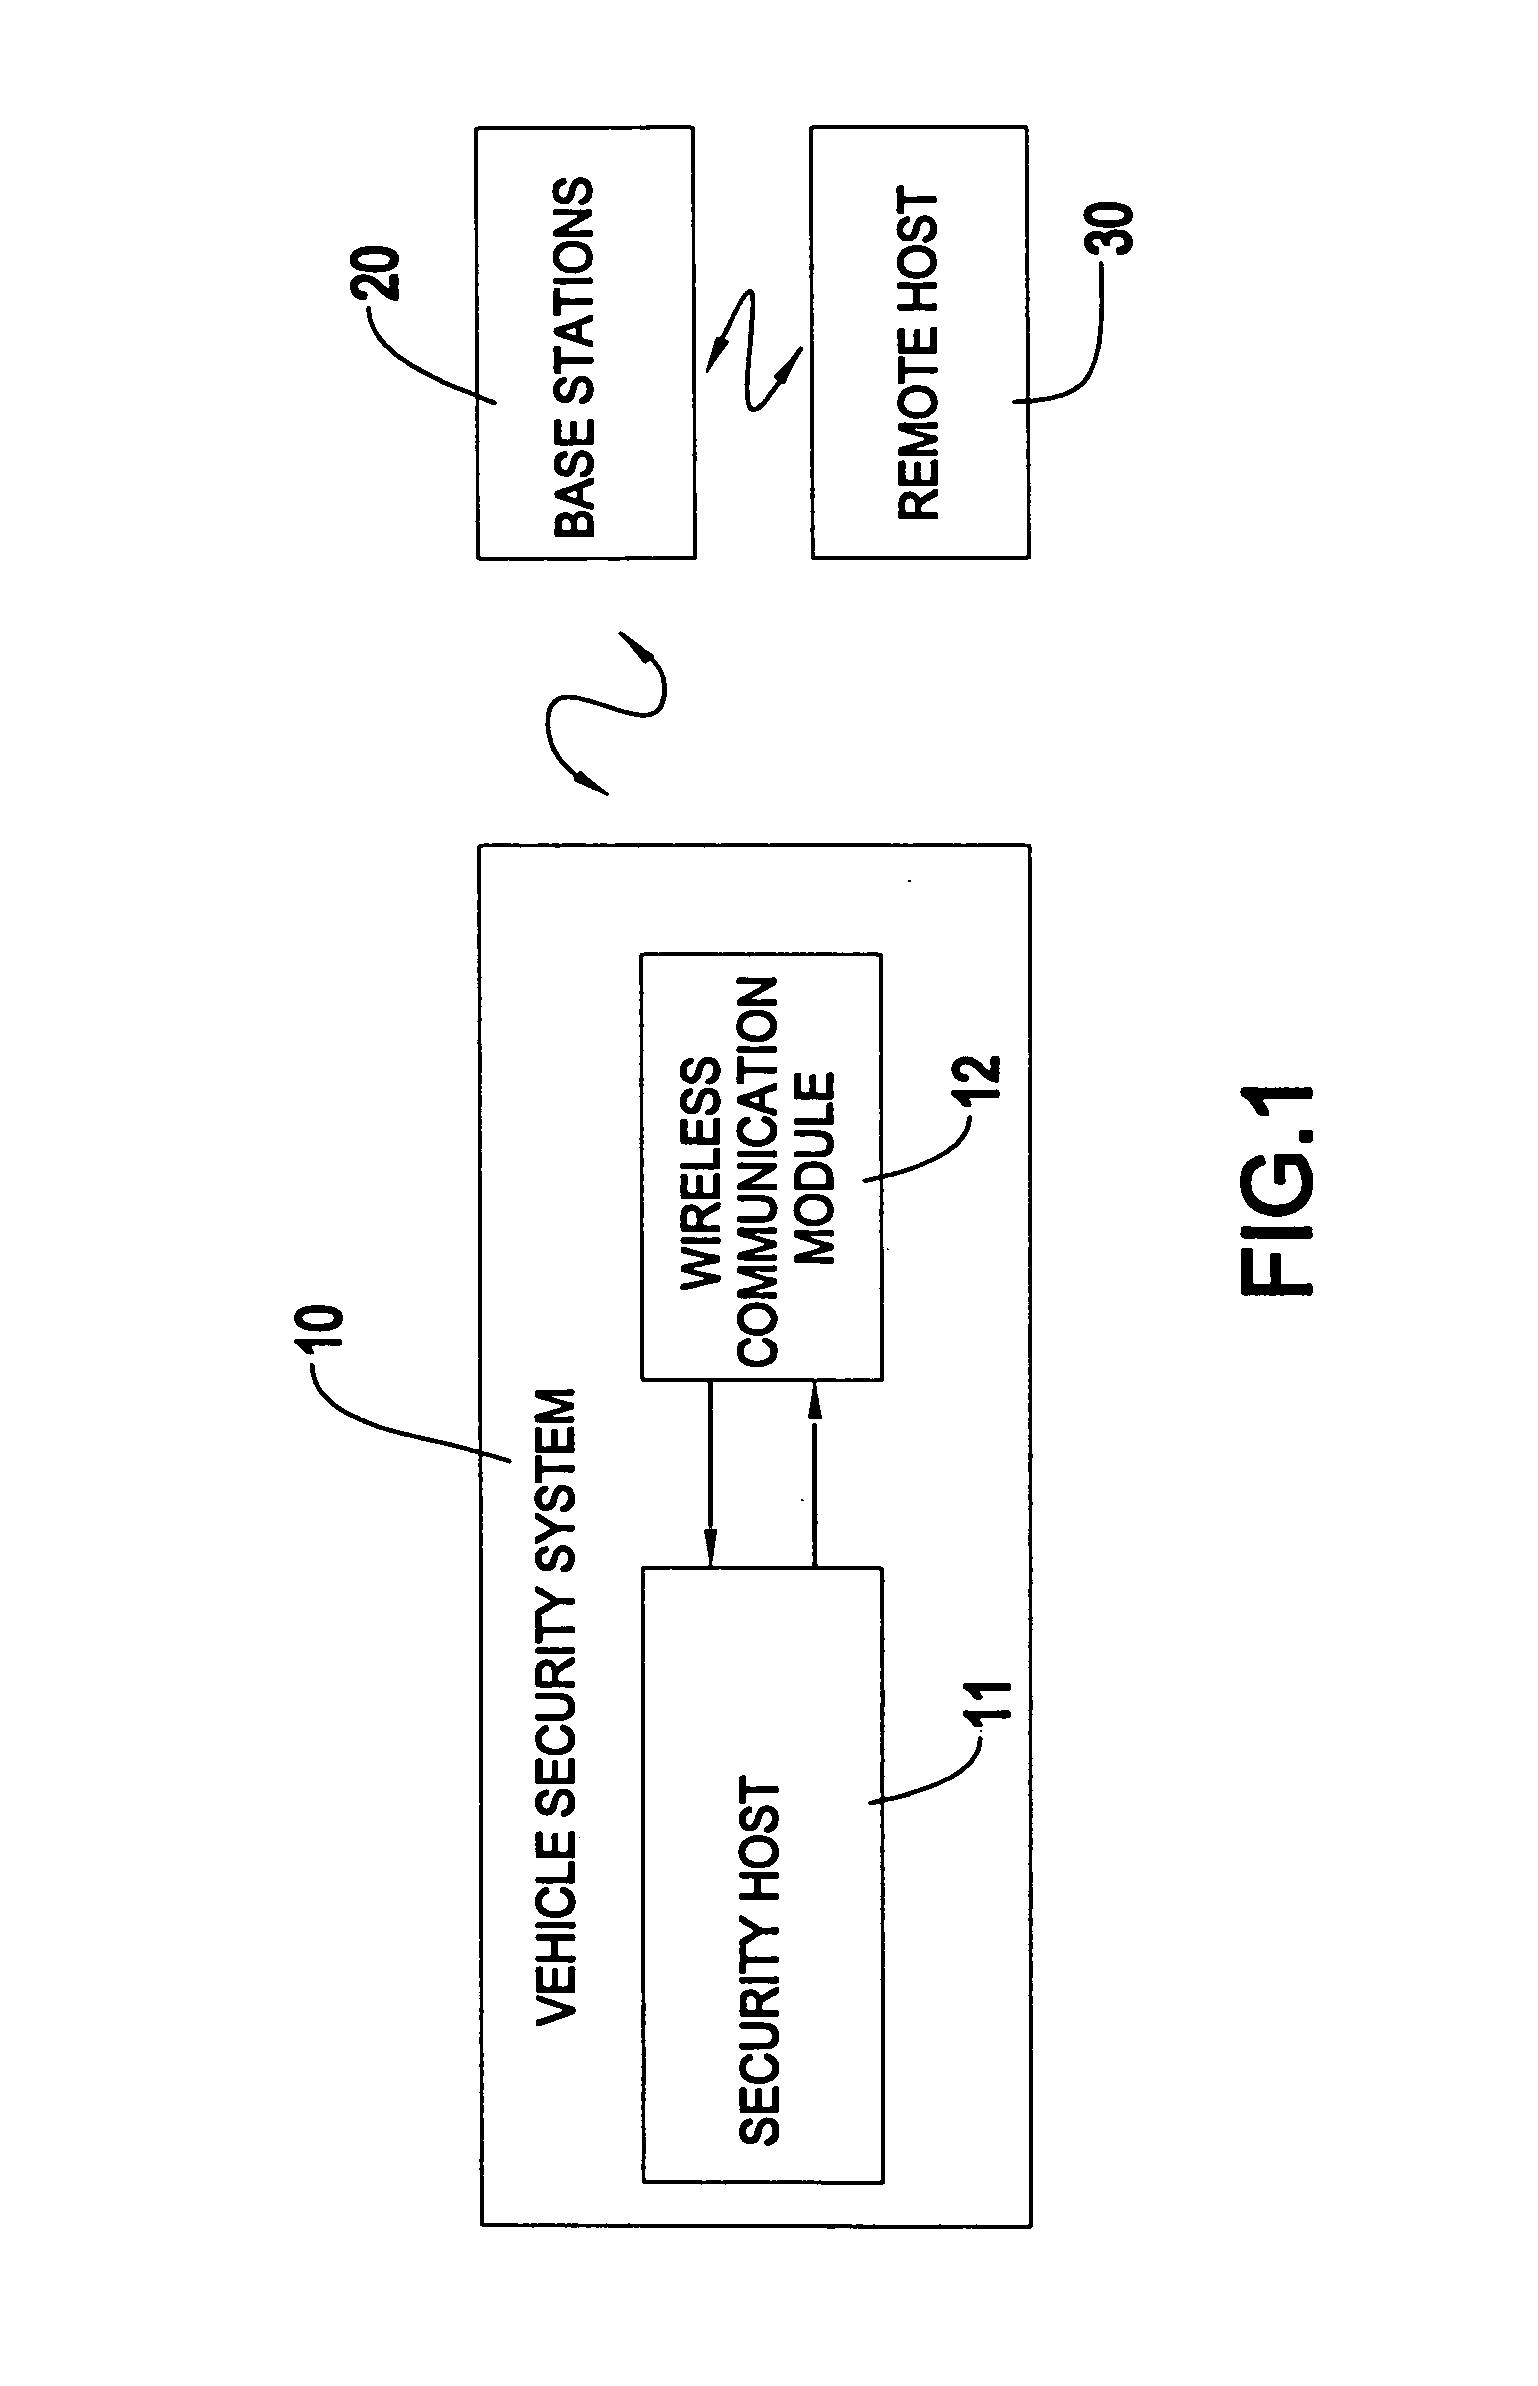 Update method for wireless system of vehicle security system